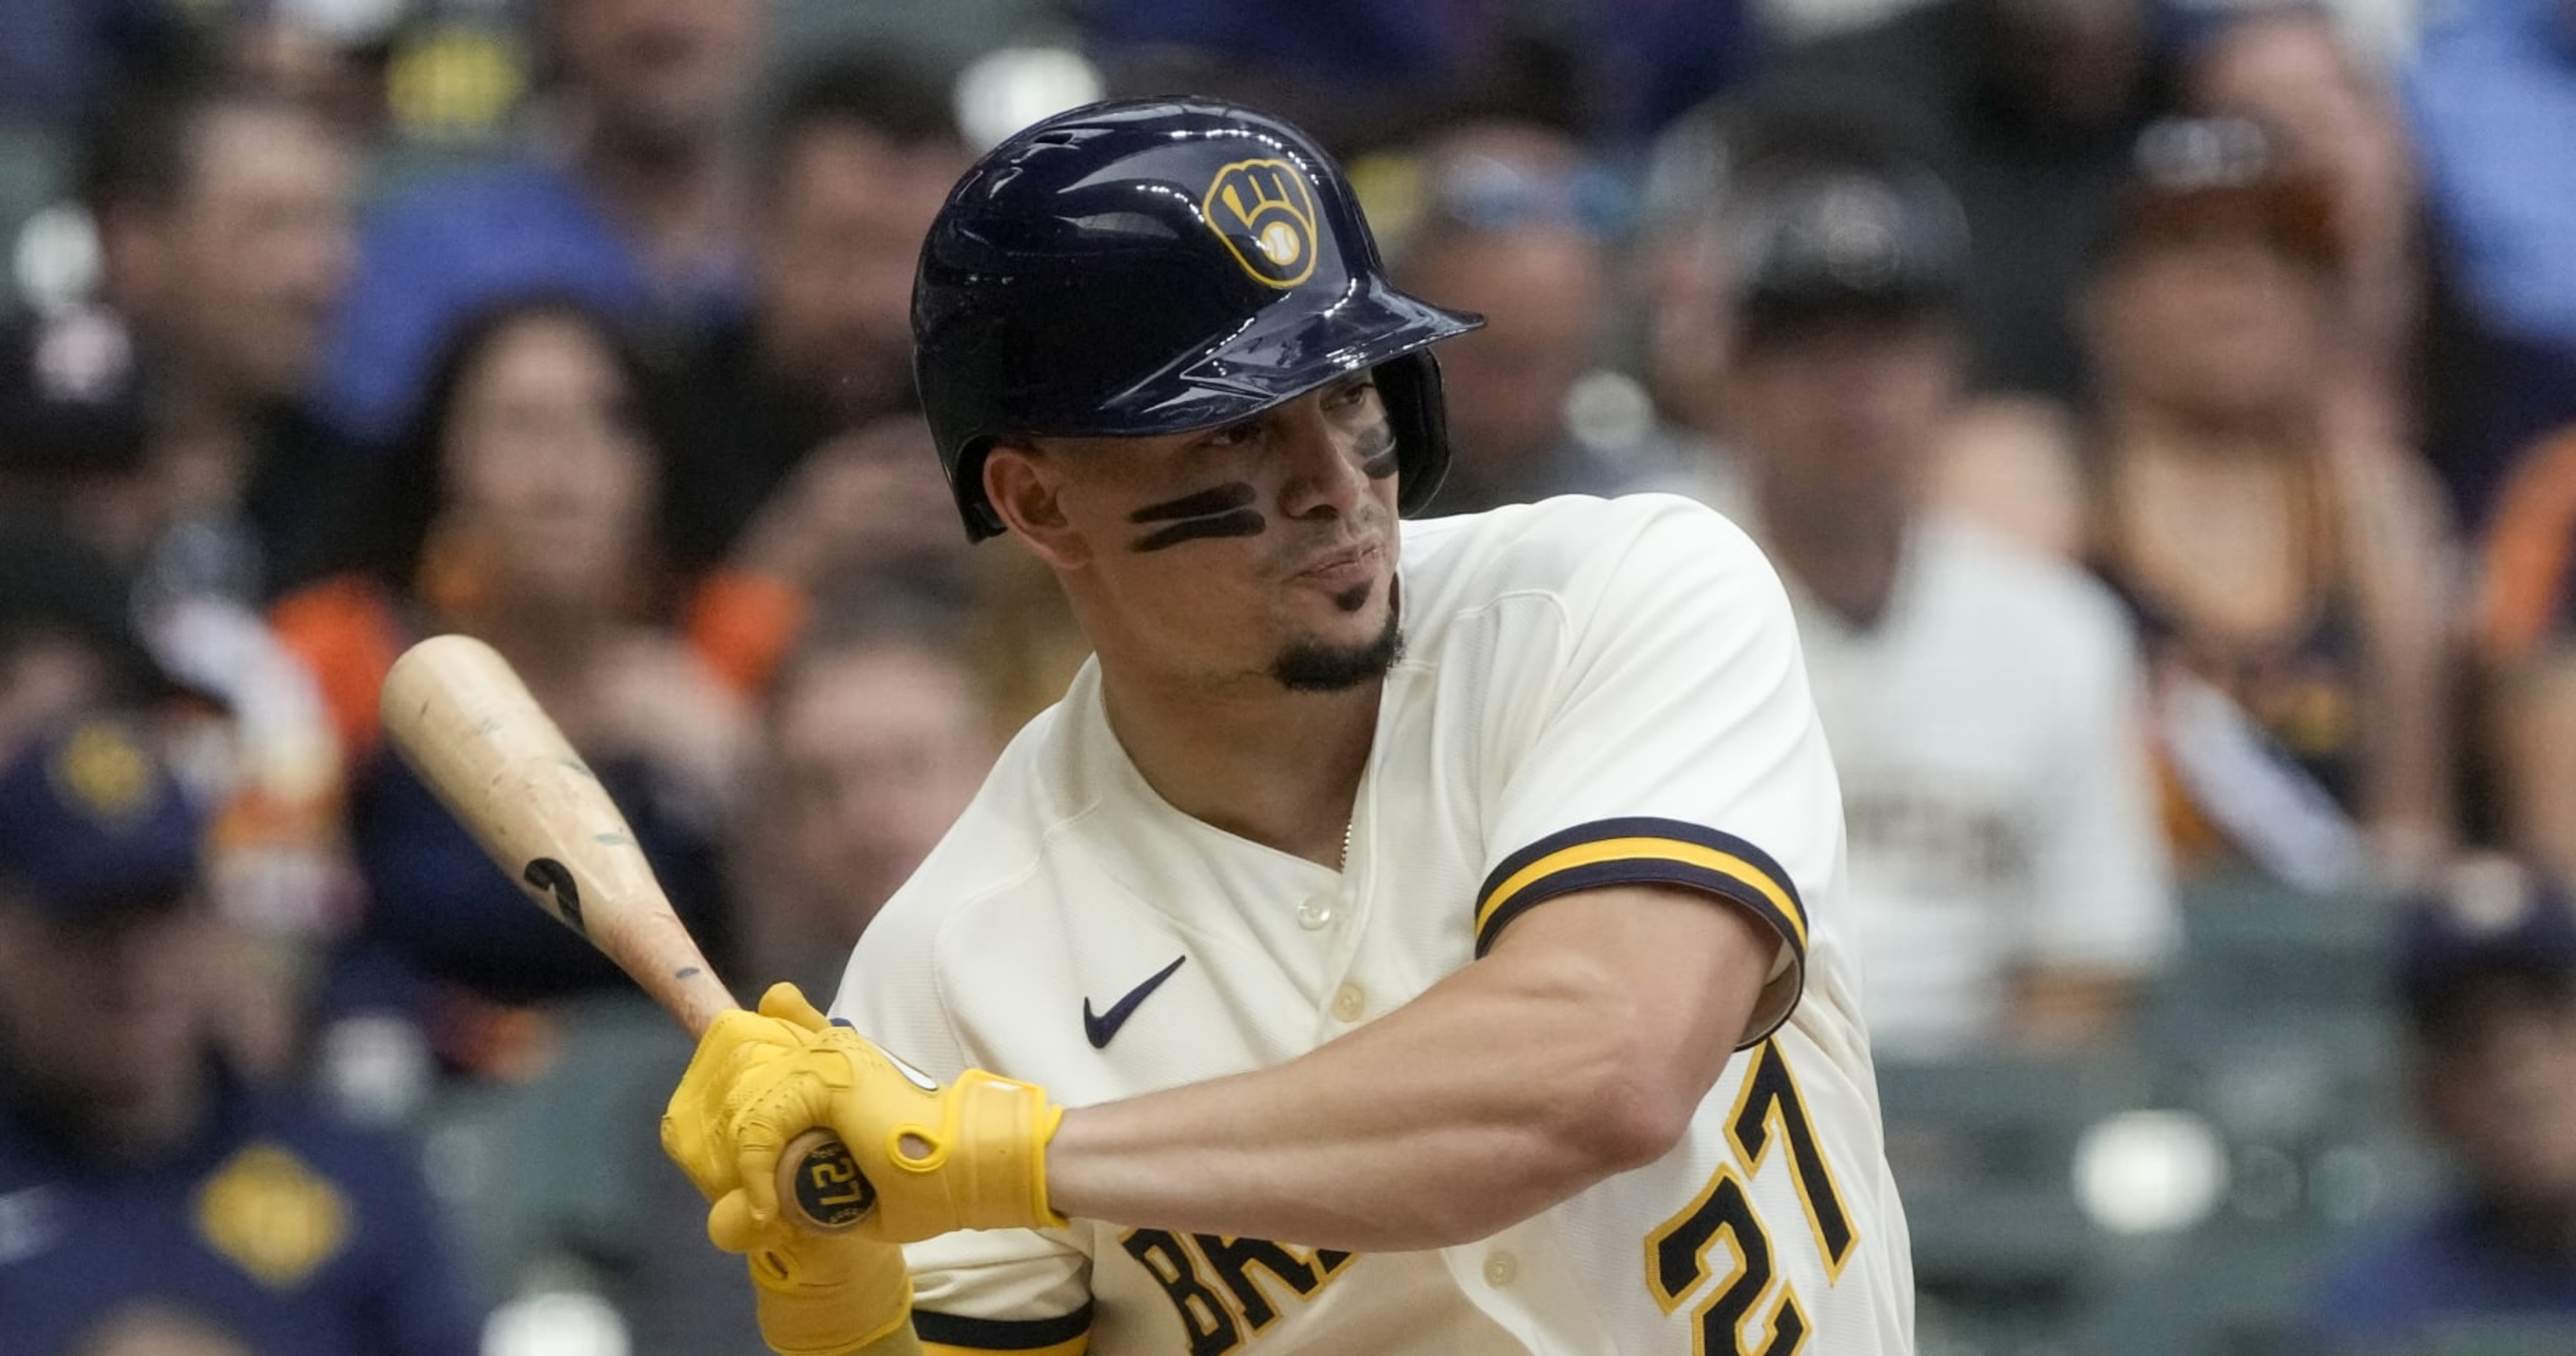 Brewers' Willy Adames gets mixed updates after getting hit by foul ball